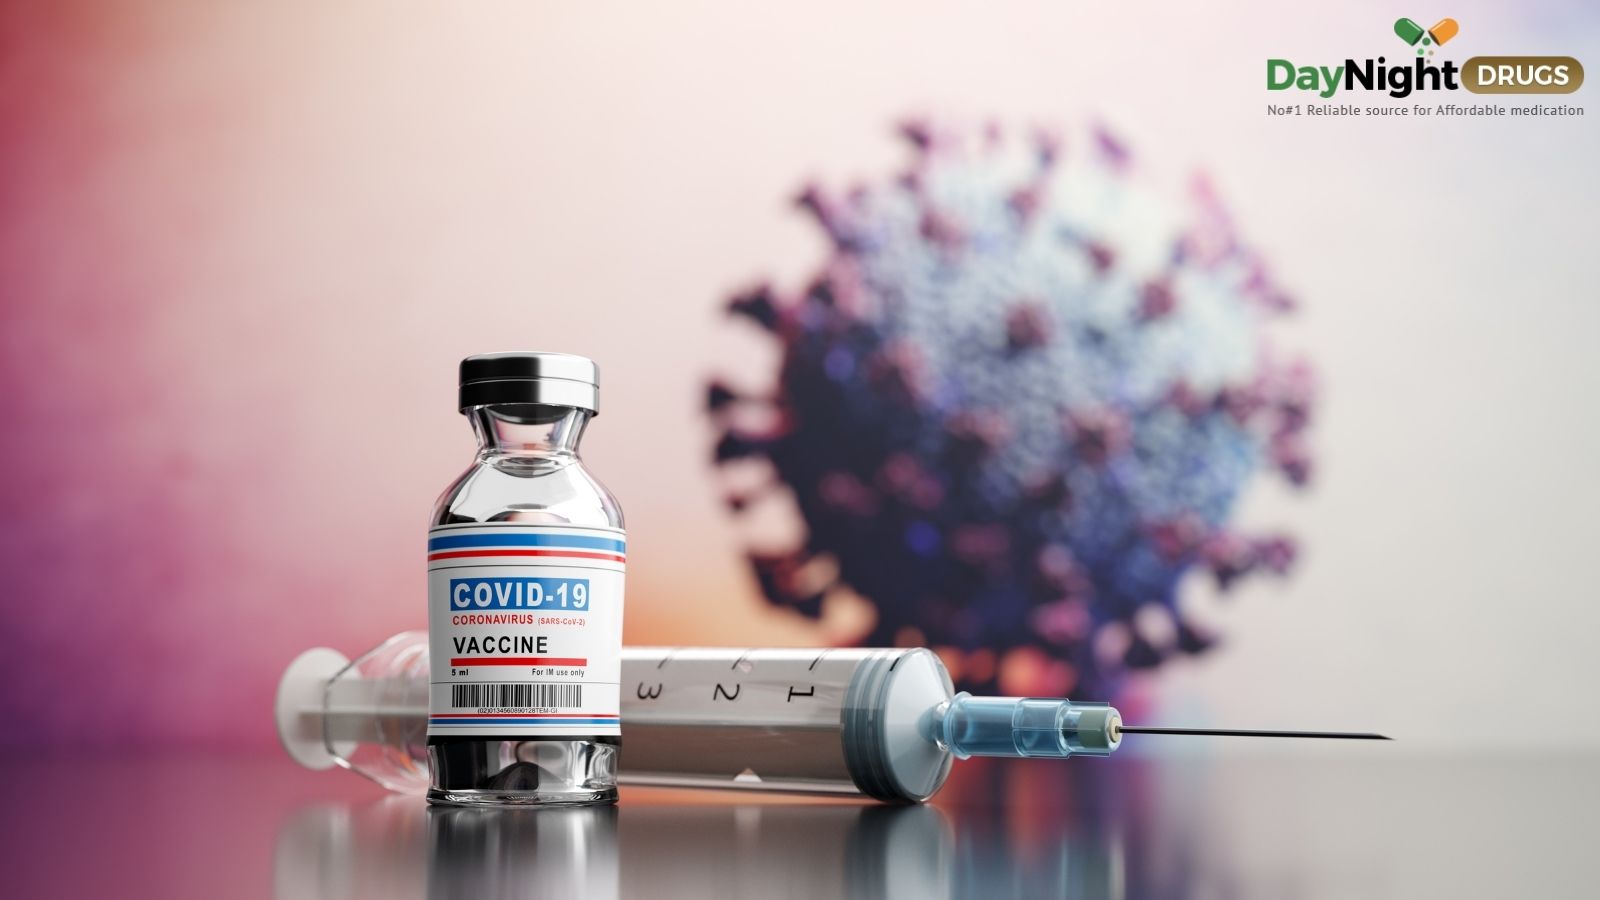 A new Covid vaccine is making its way to market  against the new variant  of COVID-19.